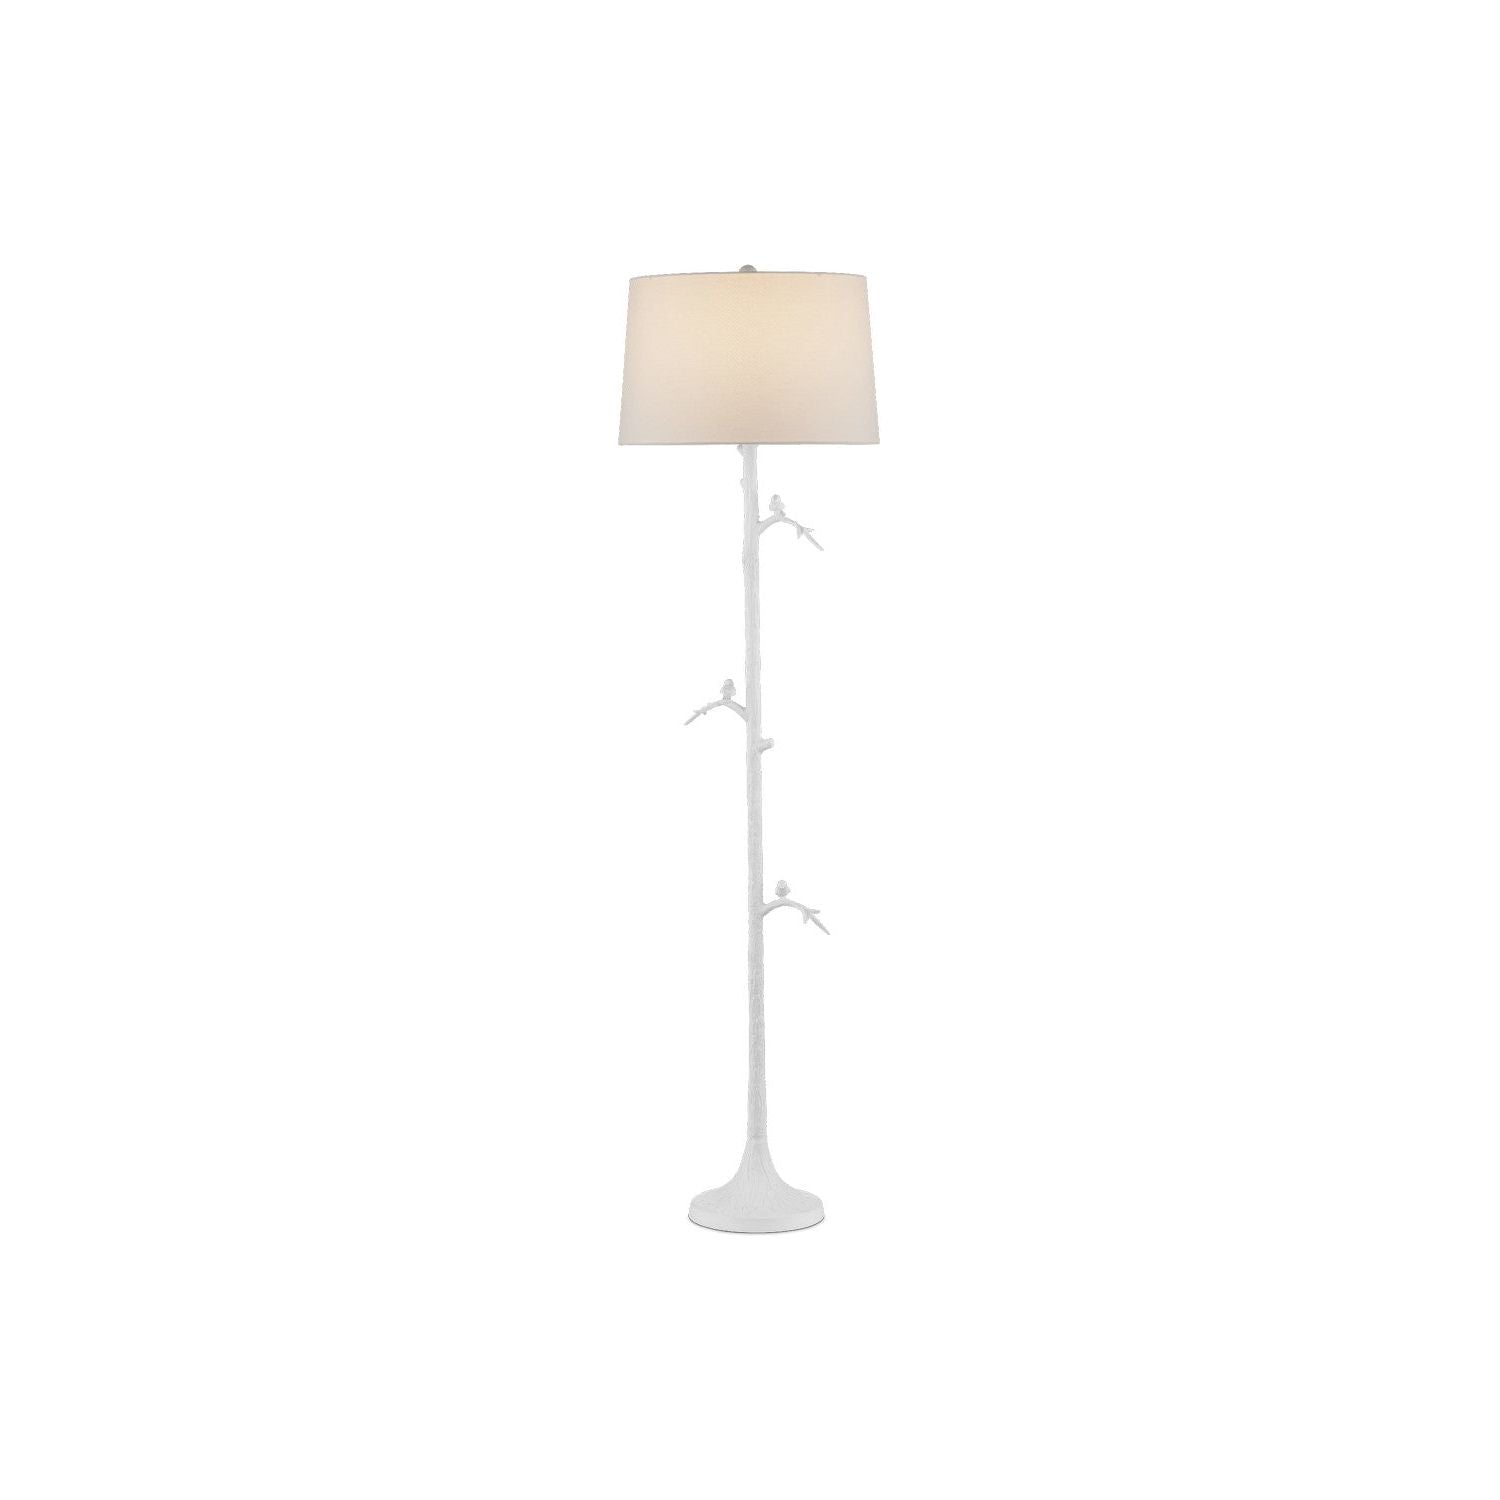 Currey and Company - 8000-0158 - One Light Floor Lamp - Gesso White